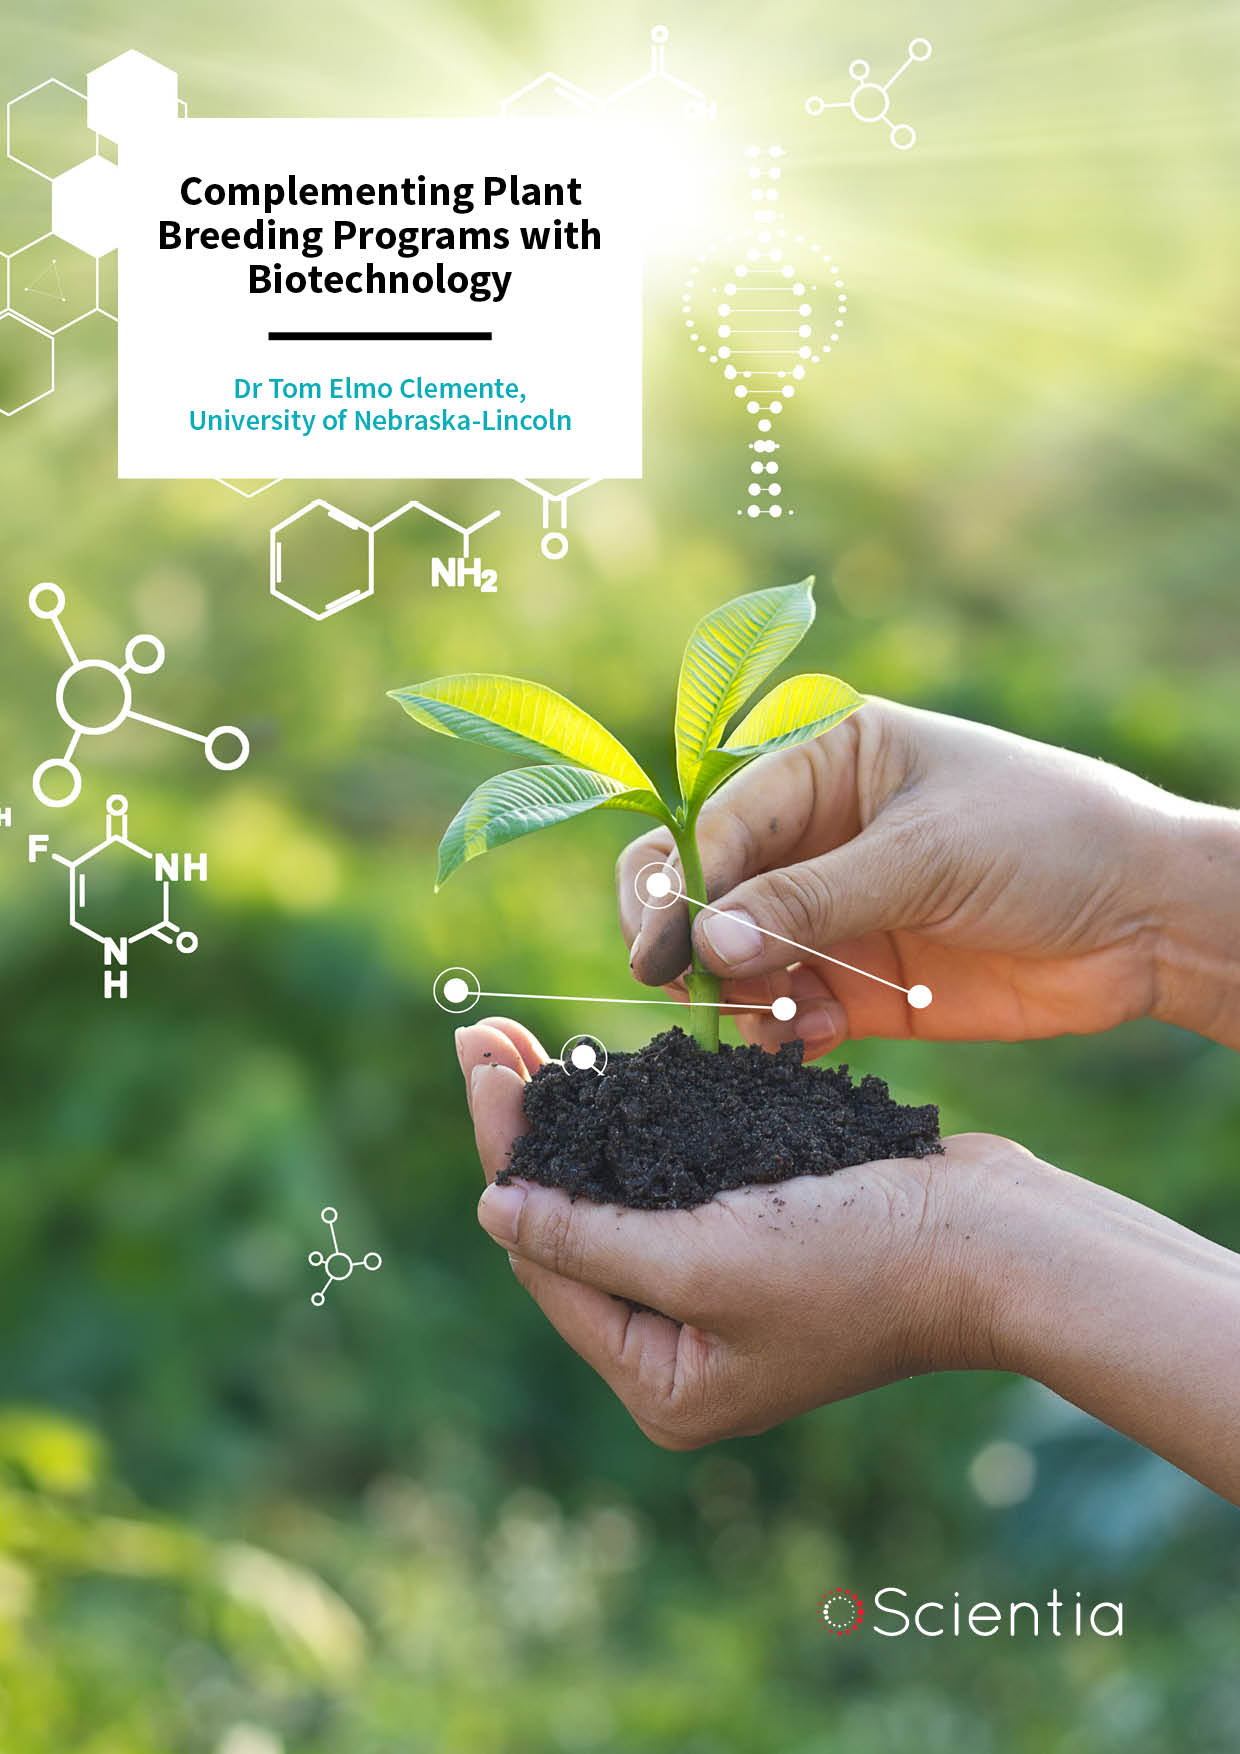 Complementing Plant Breeding Programs with Biotechnology